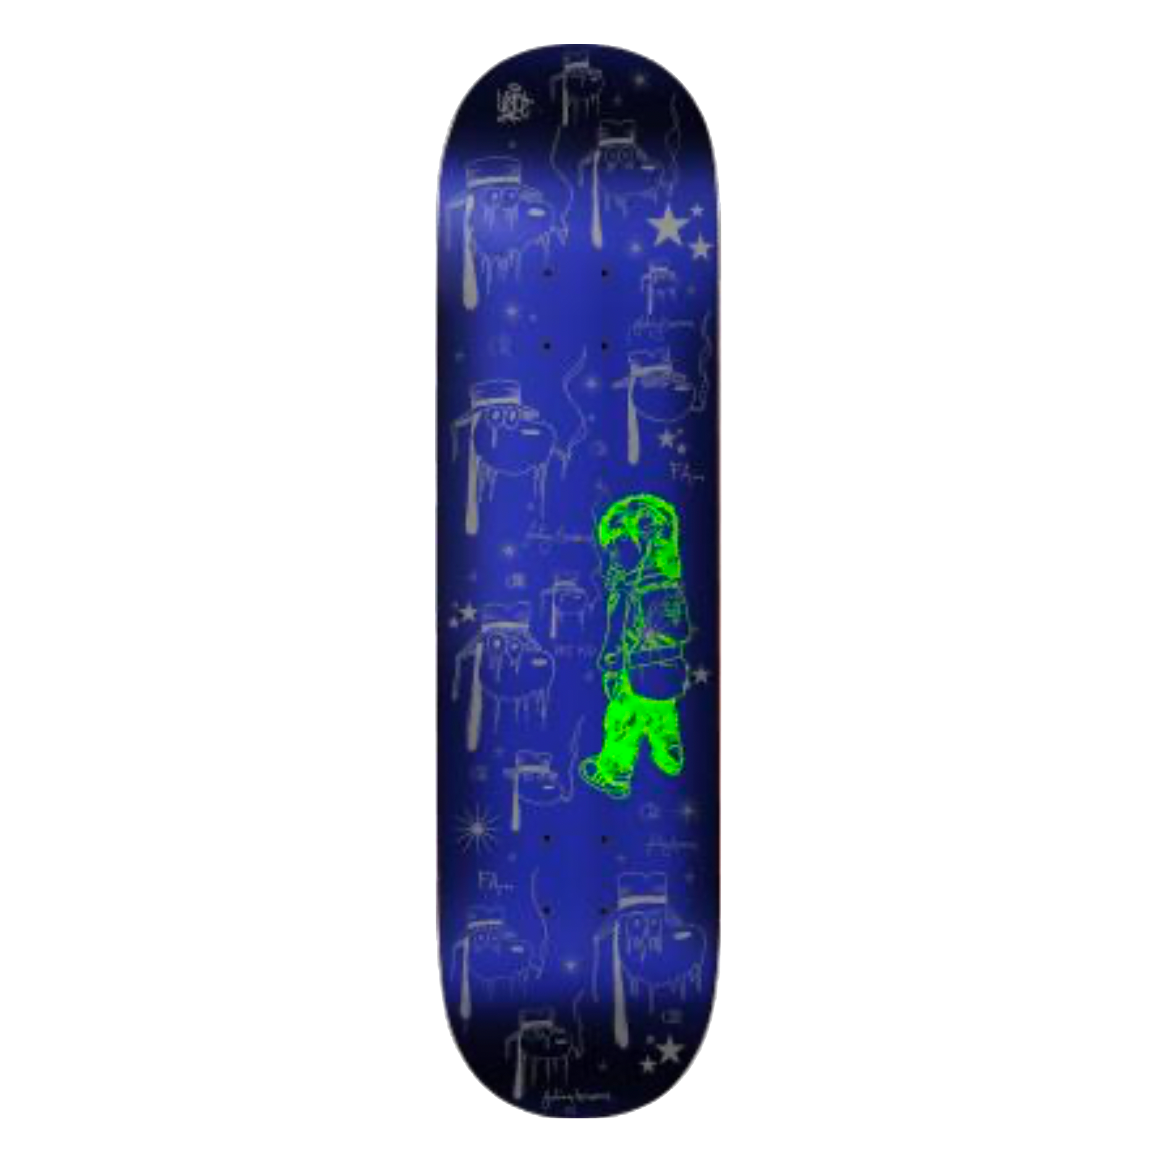 Fucking Awesome Jason Dill deck Ratkid Colorway 2 8.25"